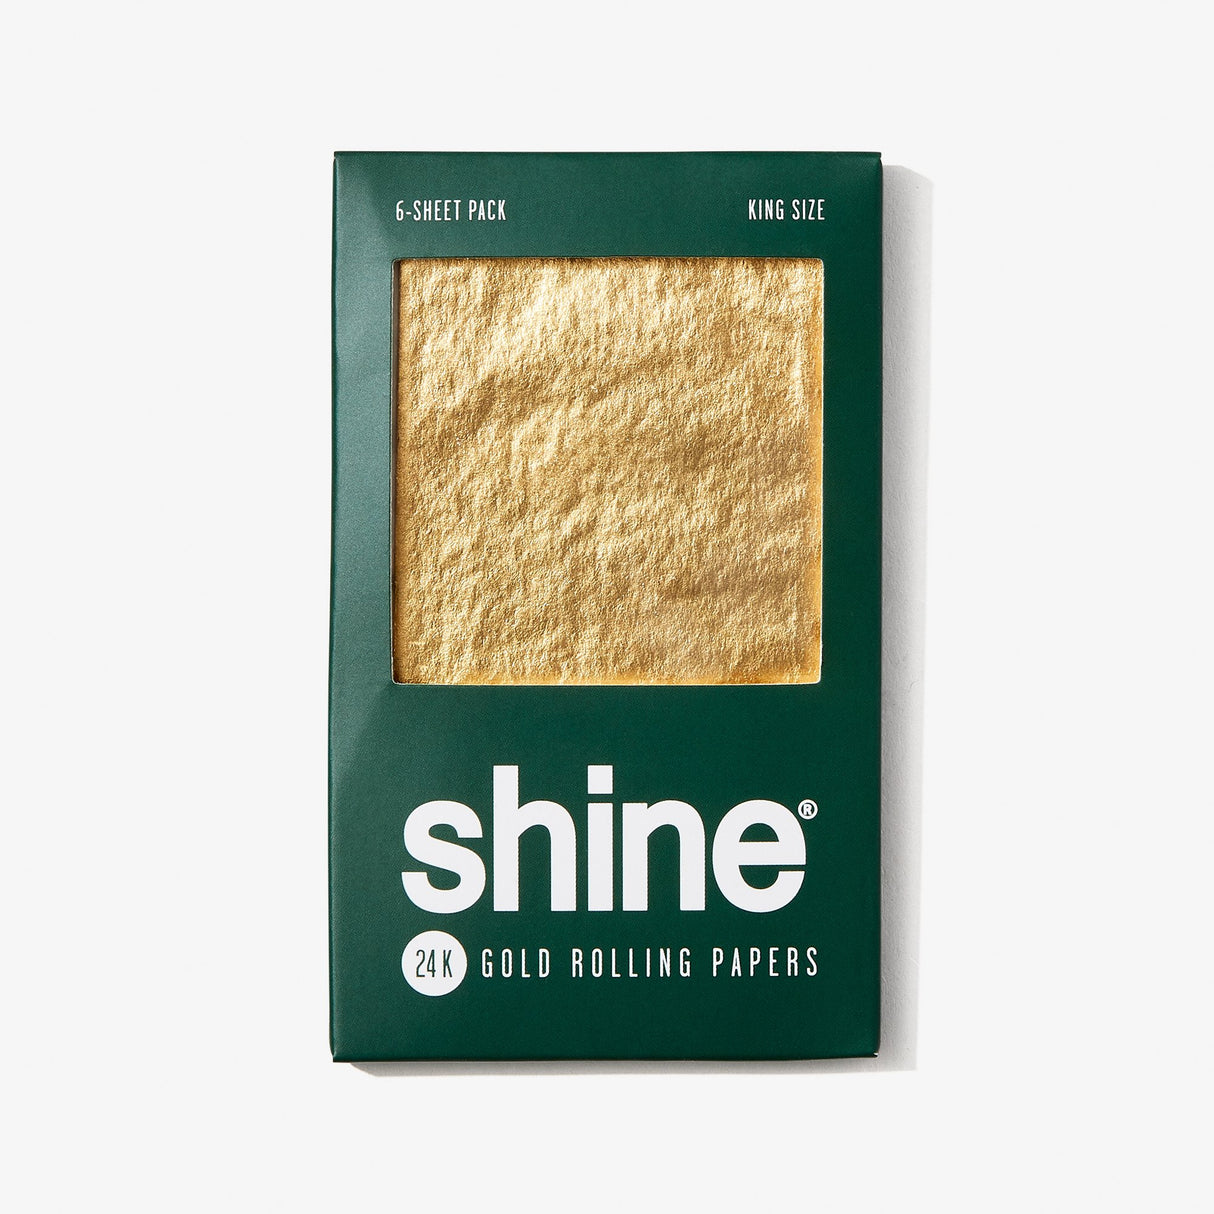 Shine 24k Gold Rolling Papers King Size